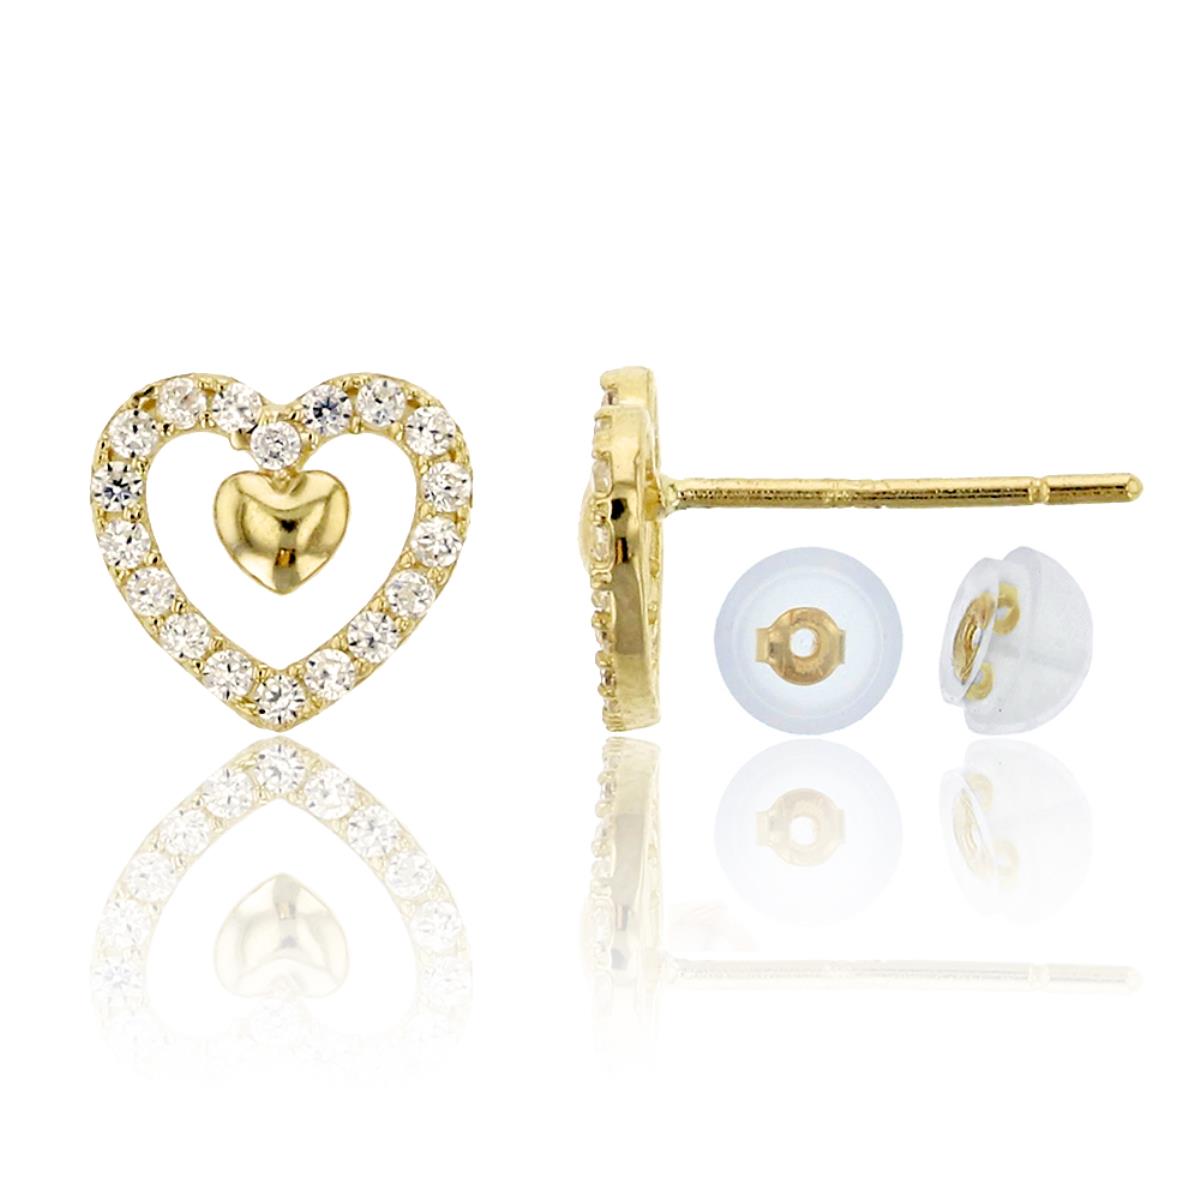 10K Yellow Gold Micropave 7mm Open Heart CZ Stud Earring & 10K Silicone Back